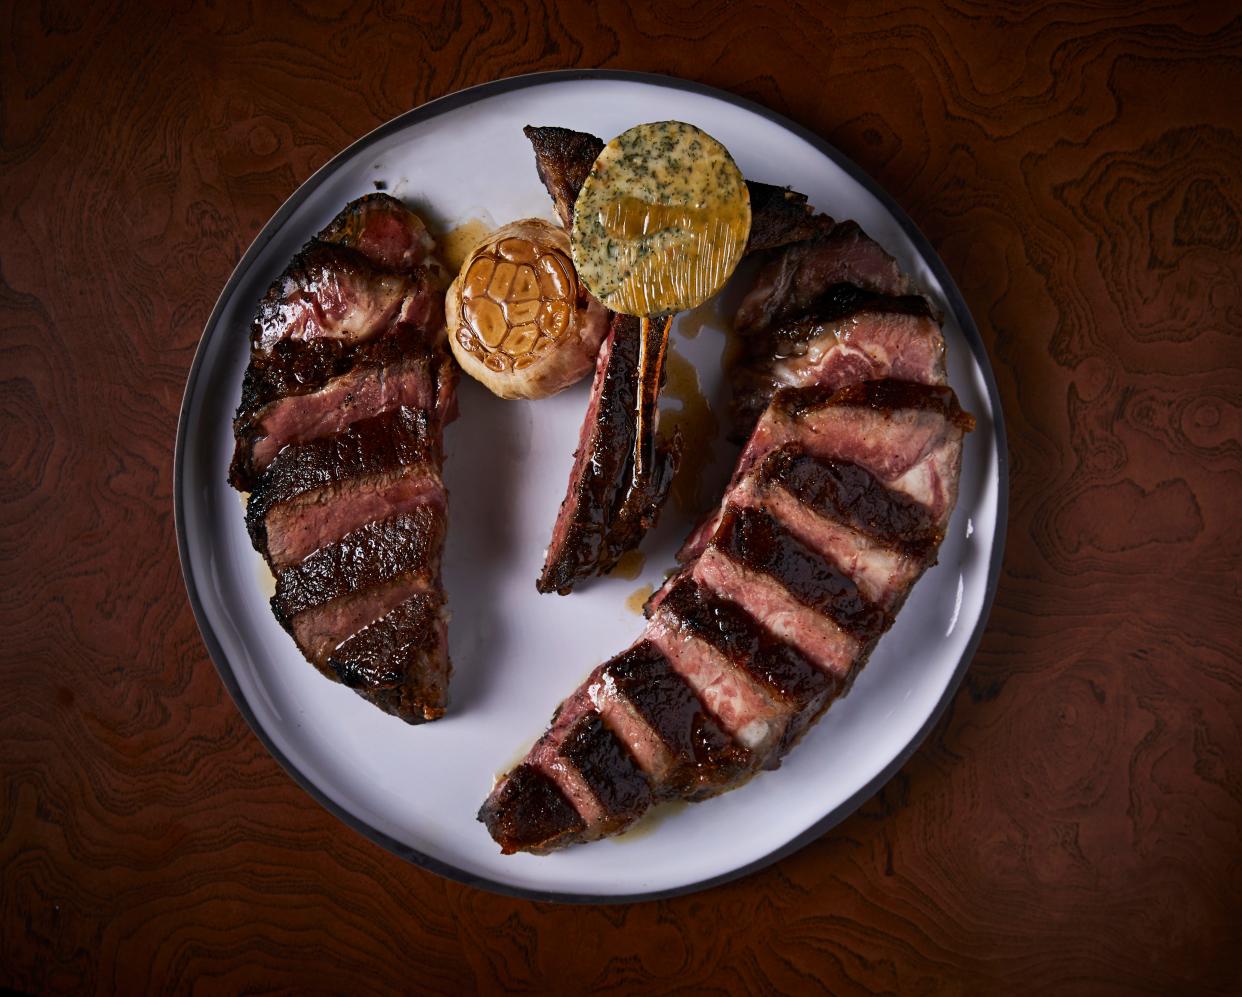 On the menu at The Butcher's Club, a 44-ounce dry aged porterhouse steak. The high-end steakhouse by acclaimed chef Jeremy Ford opened at the PGA National Resort in 2022.